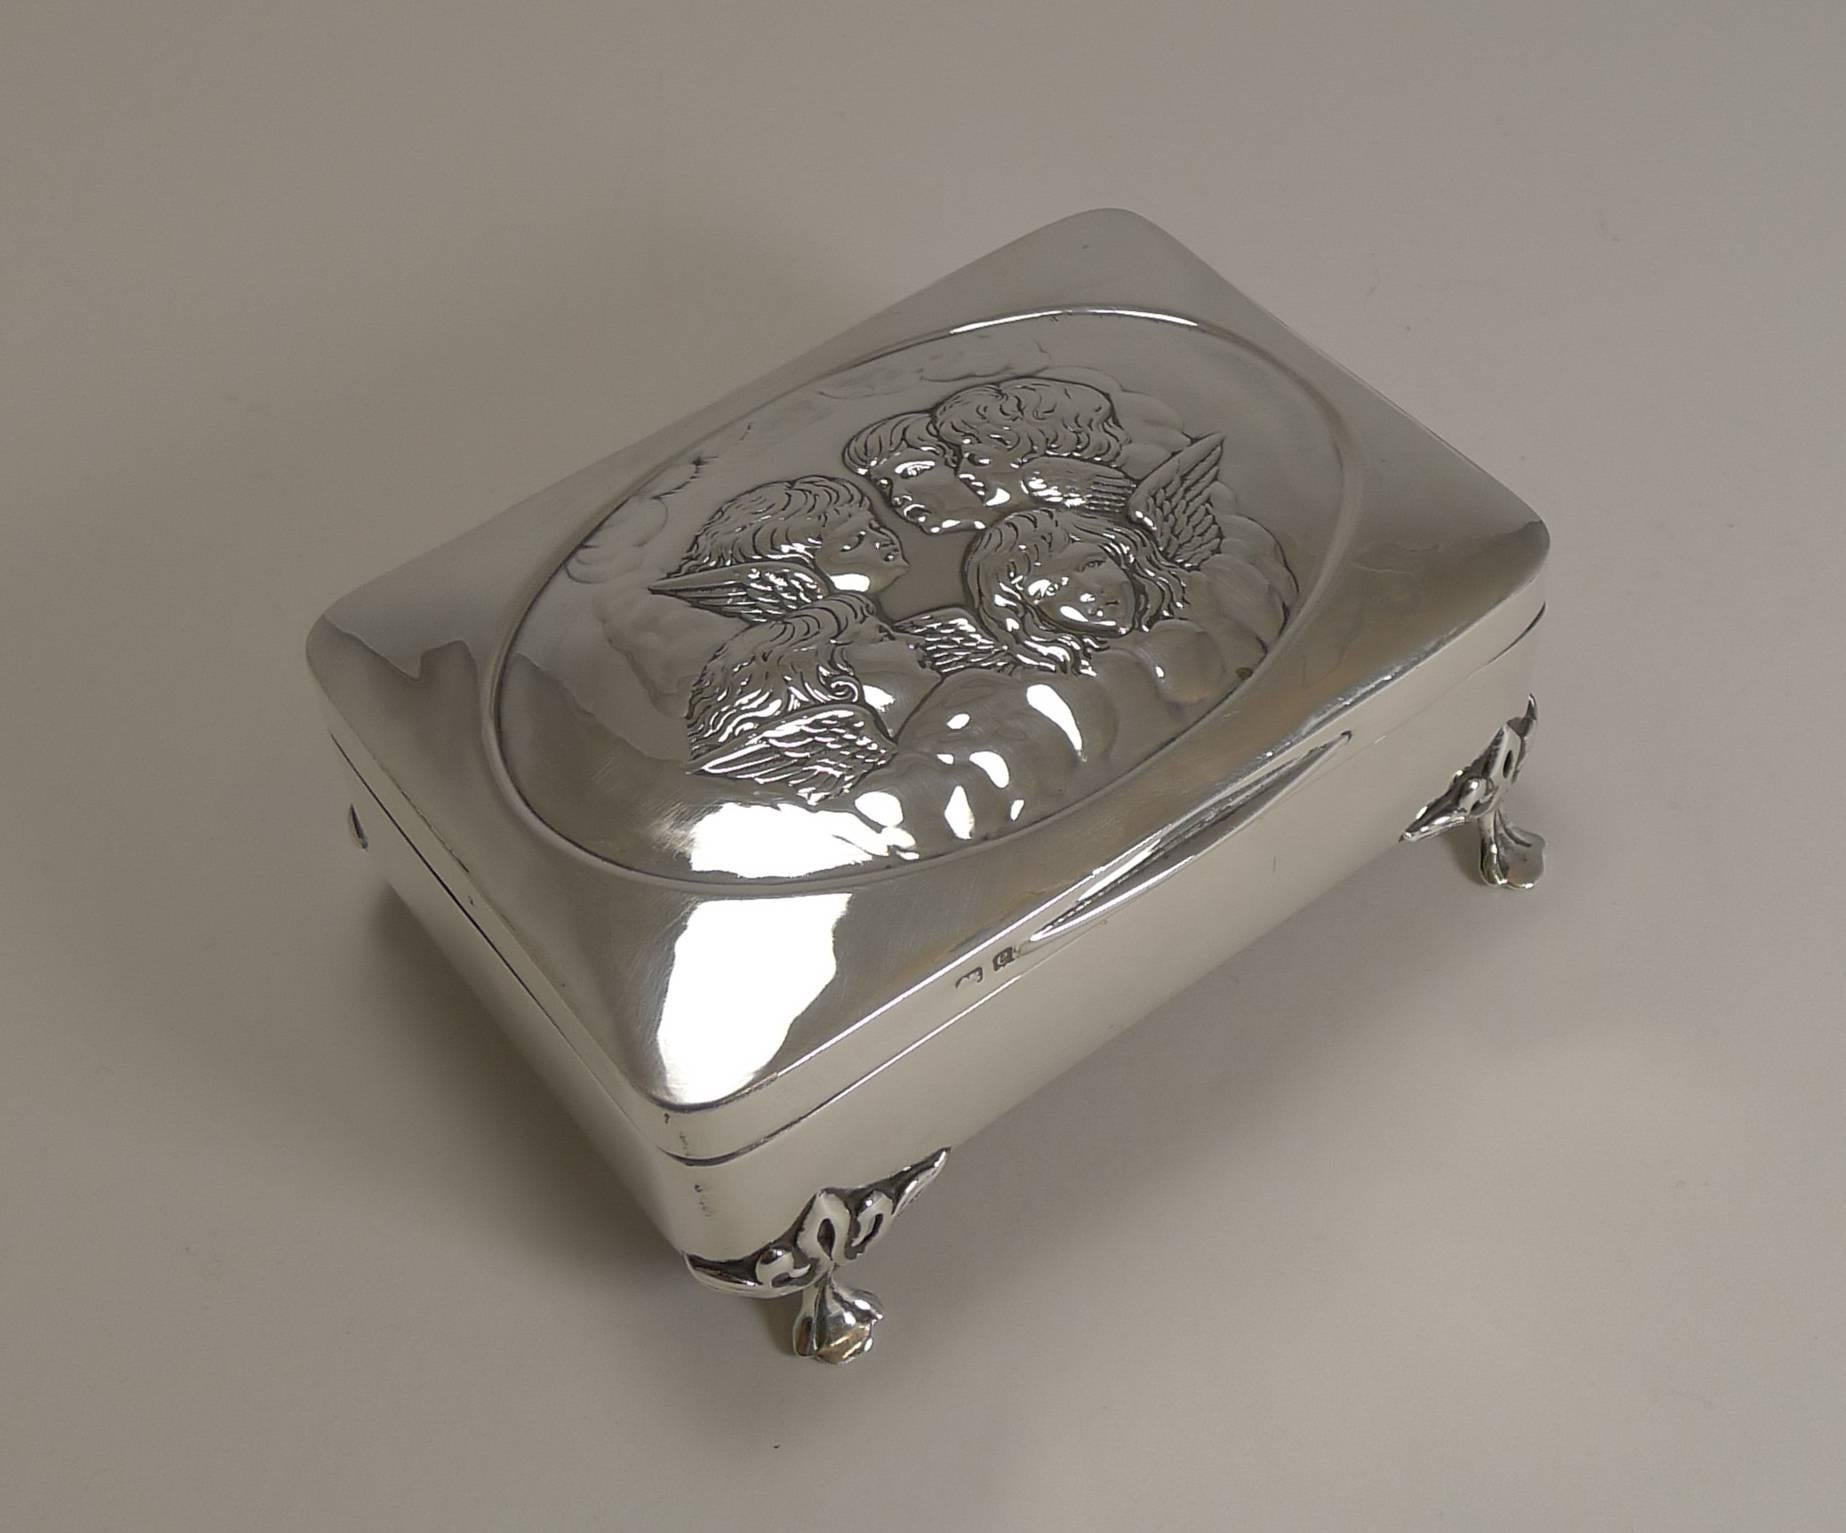 A beautiful quality example, a good large size and lovely condition.

The box is made from English sterling silver with a full hallmark for Birmingham, 1904, Edwardian in era. The makers initials are also present for the silversmith, W H